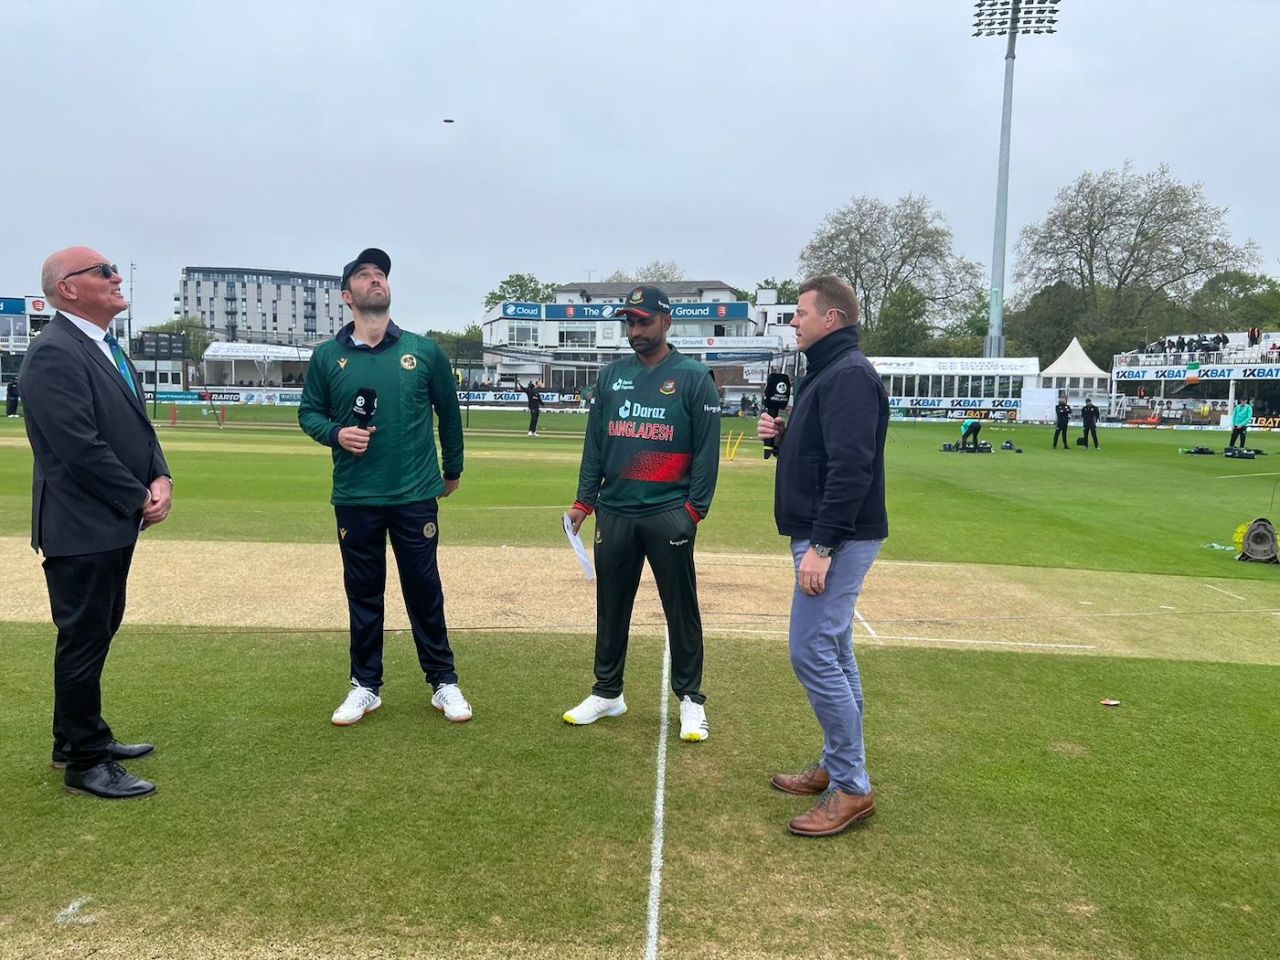 Andy Balbirnie and Tamim Iqbal at the toss along with Jeff Crowe and Niall O'Brien, Ireland vs Bangladesh, 3rd ODI, Chelmsford, May 14, 2023